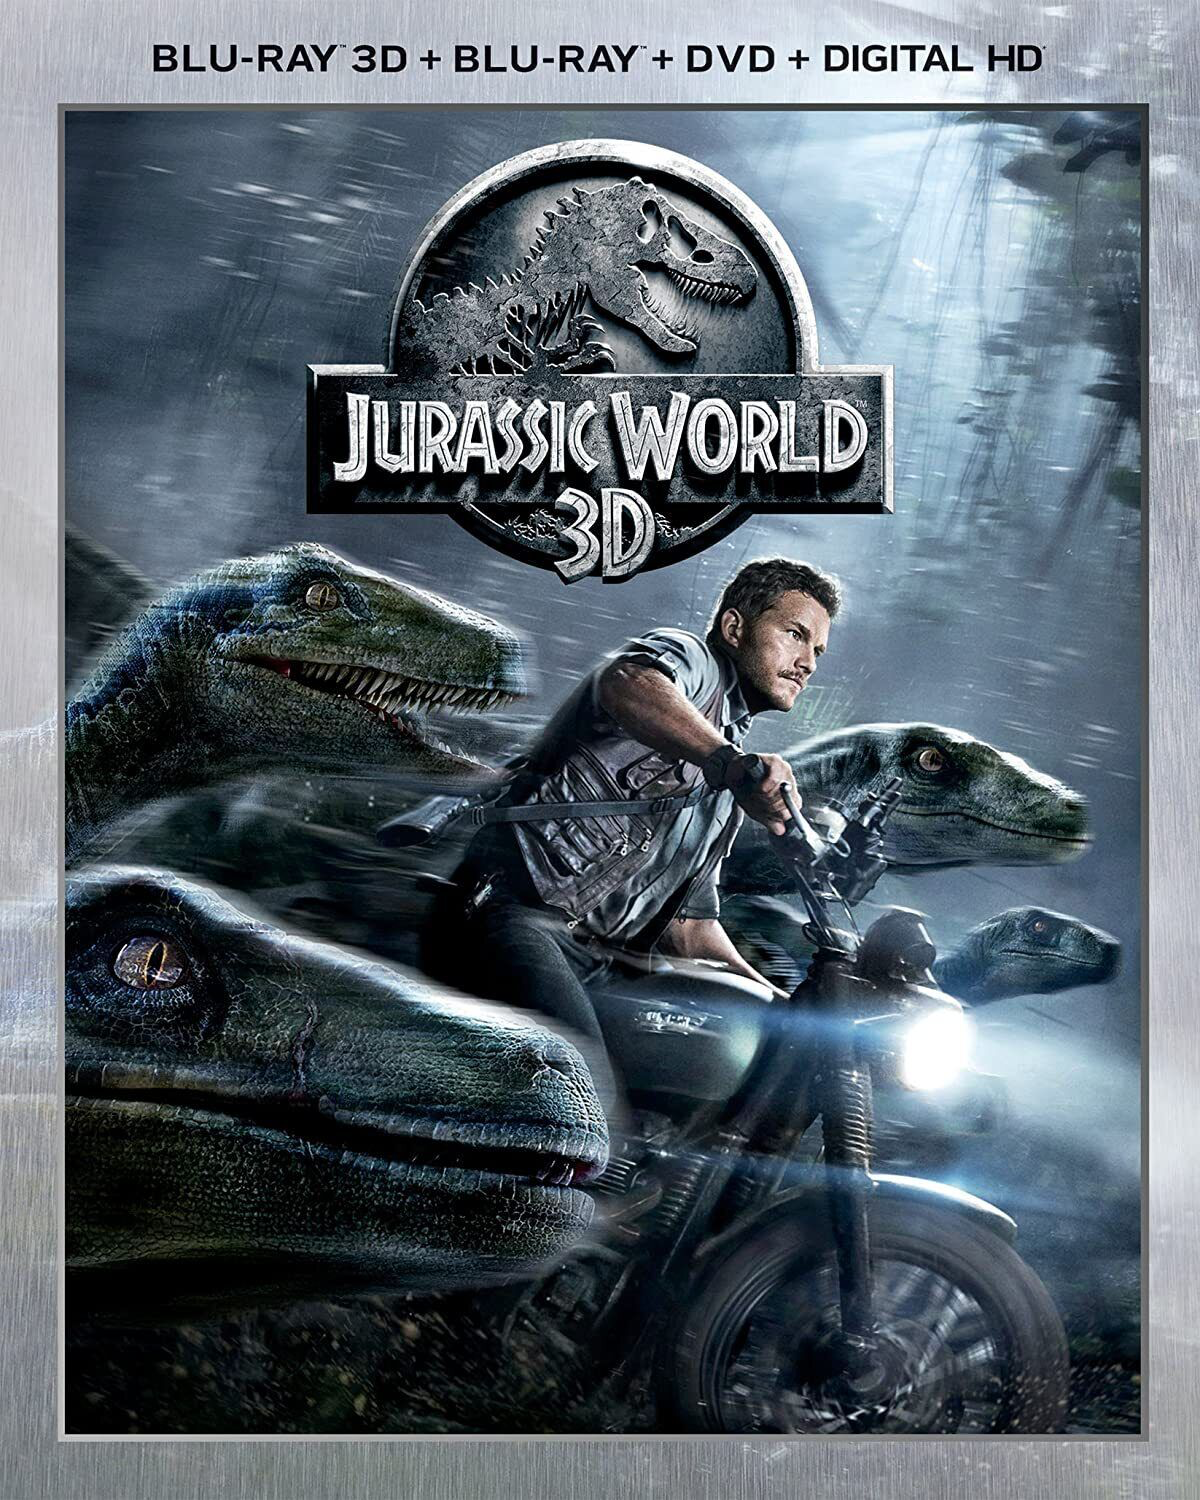 Jurassic World Limited Edition - 3D Blu-ray SciFi 2015 PG-13